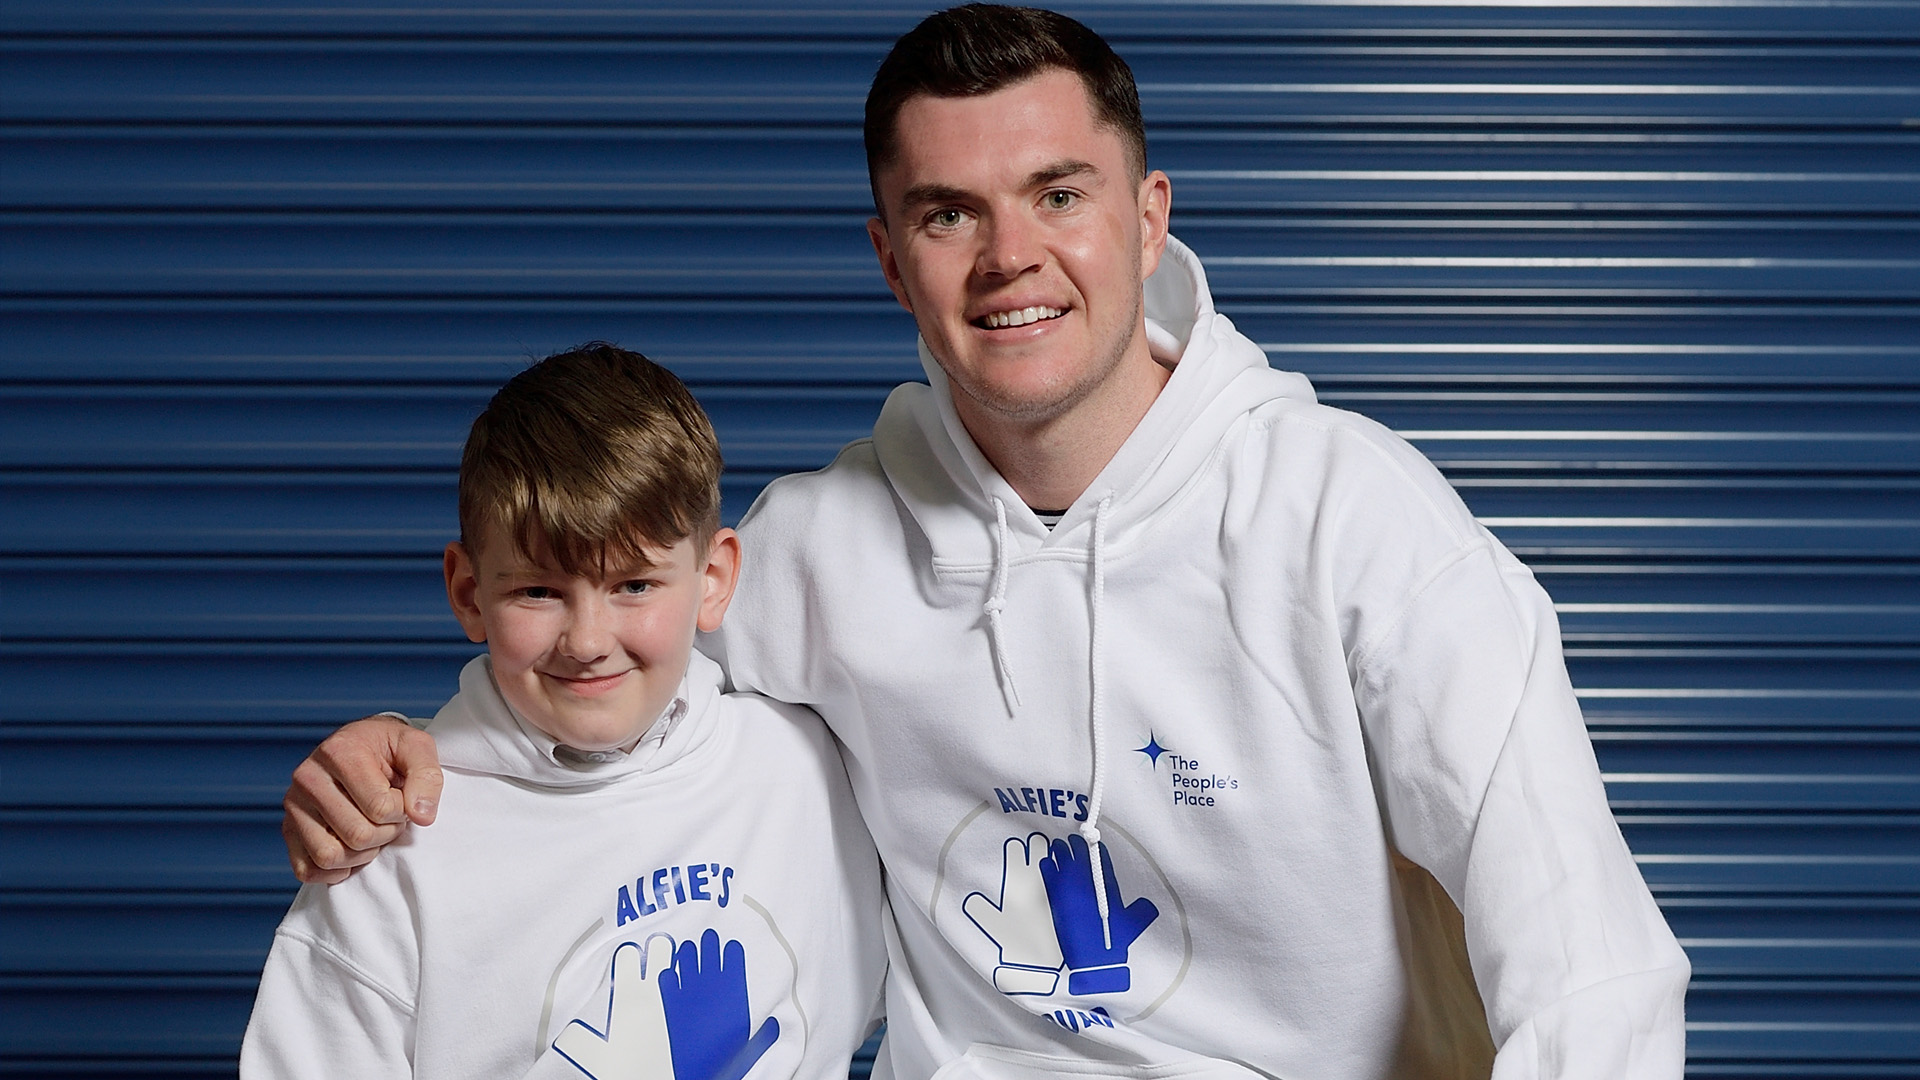 New Bereavement Service Thanks To Alfie's Squad Funding